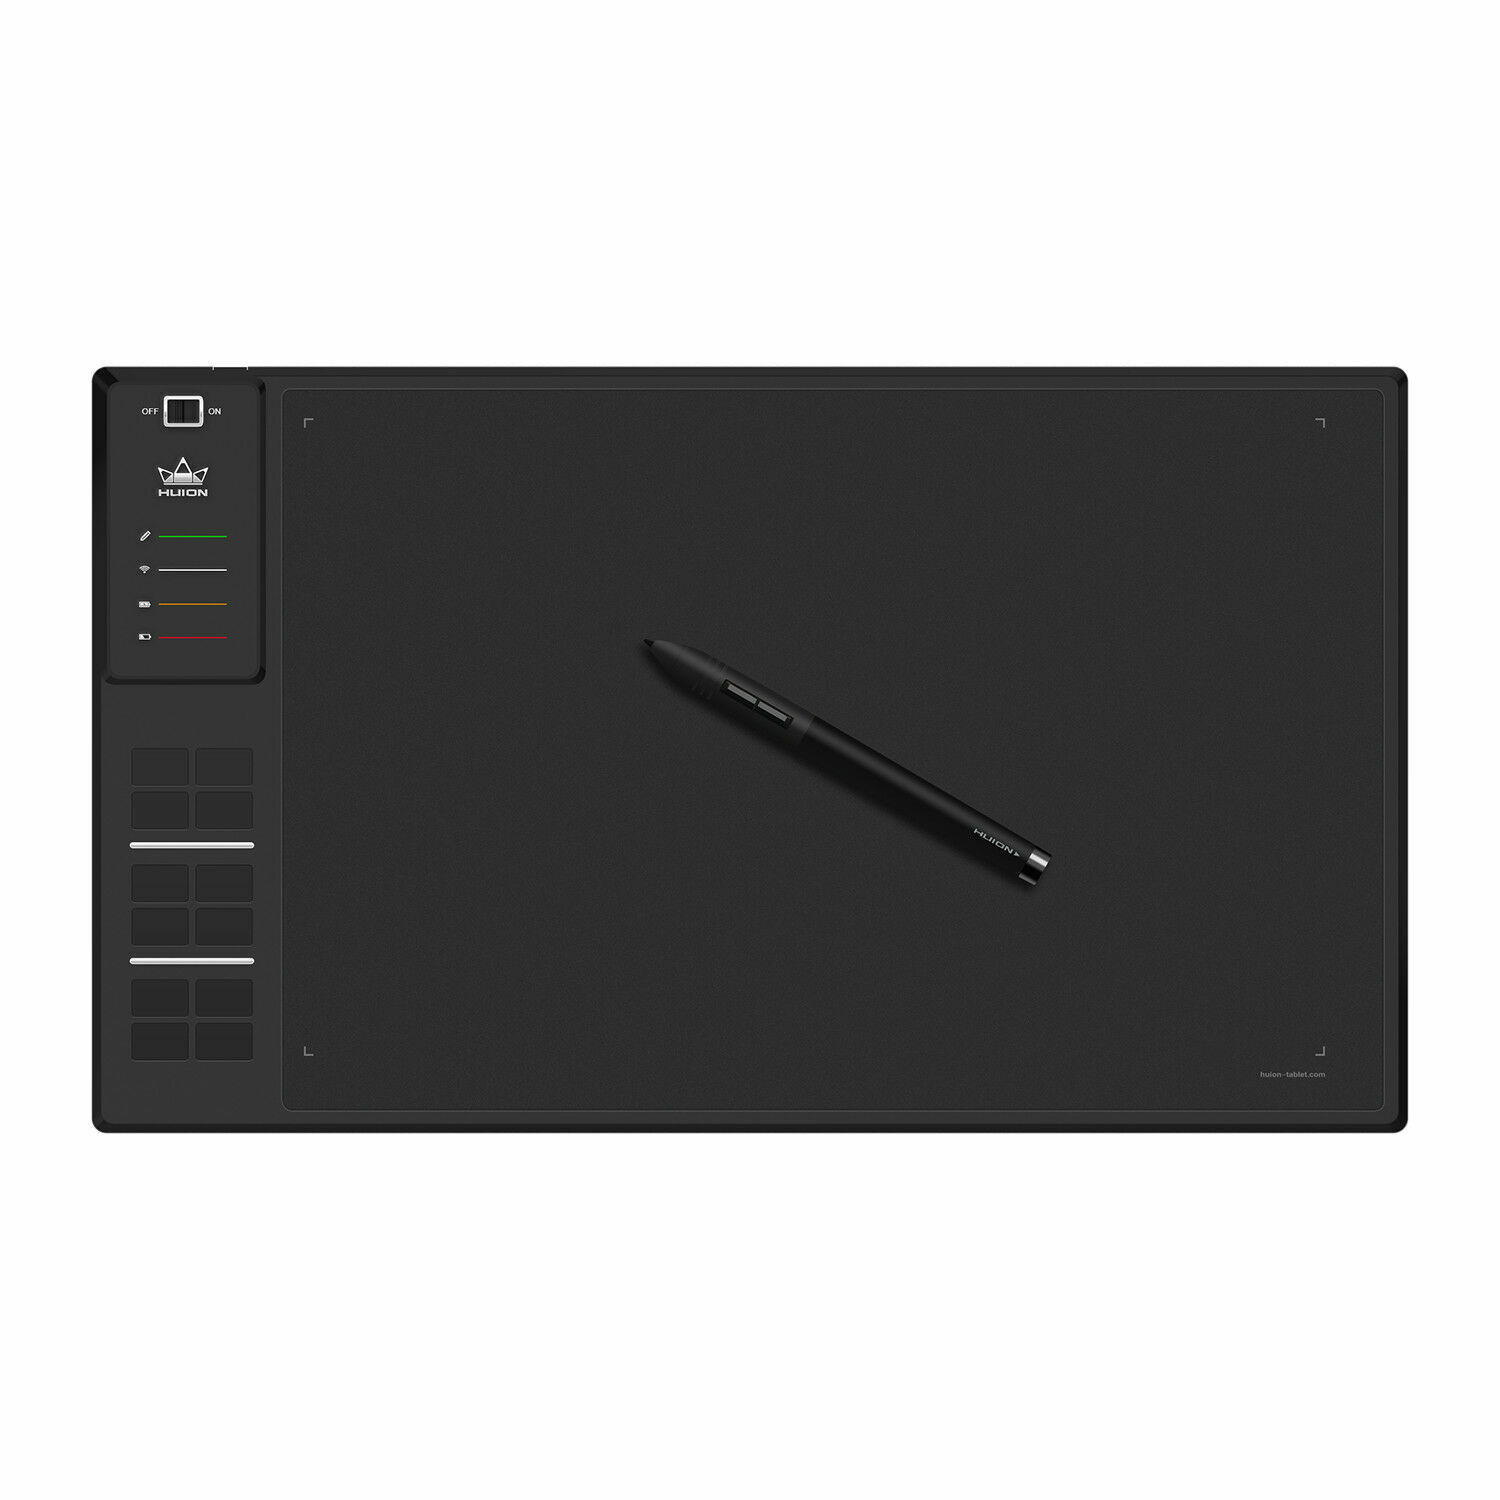 Huion WH1409 8192 Large Size Wireless Graphics Drawing Pen Tablet 13.8 x 8.6 US